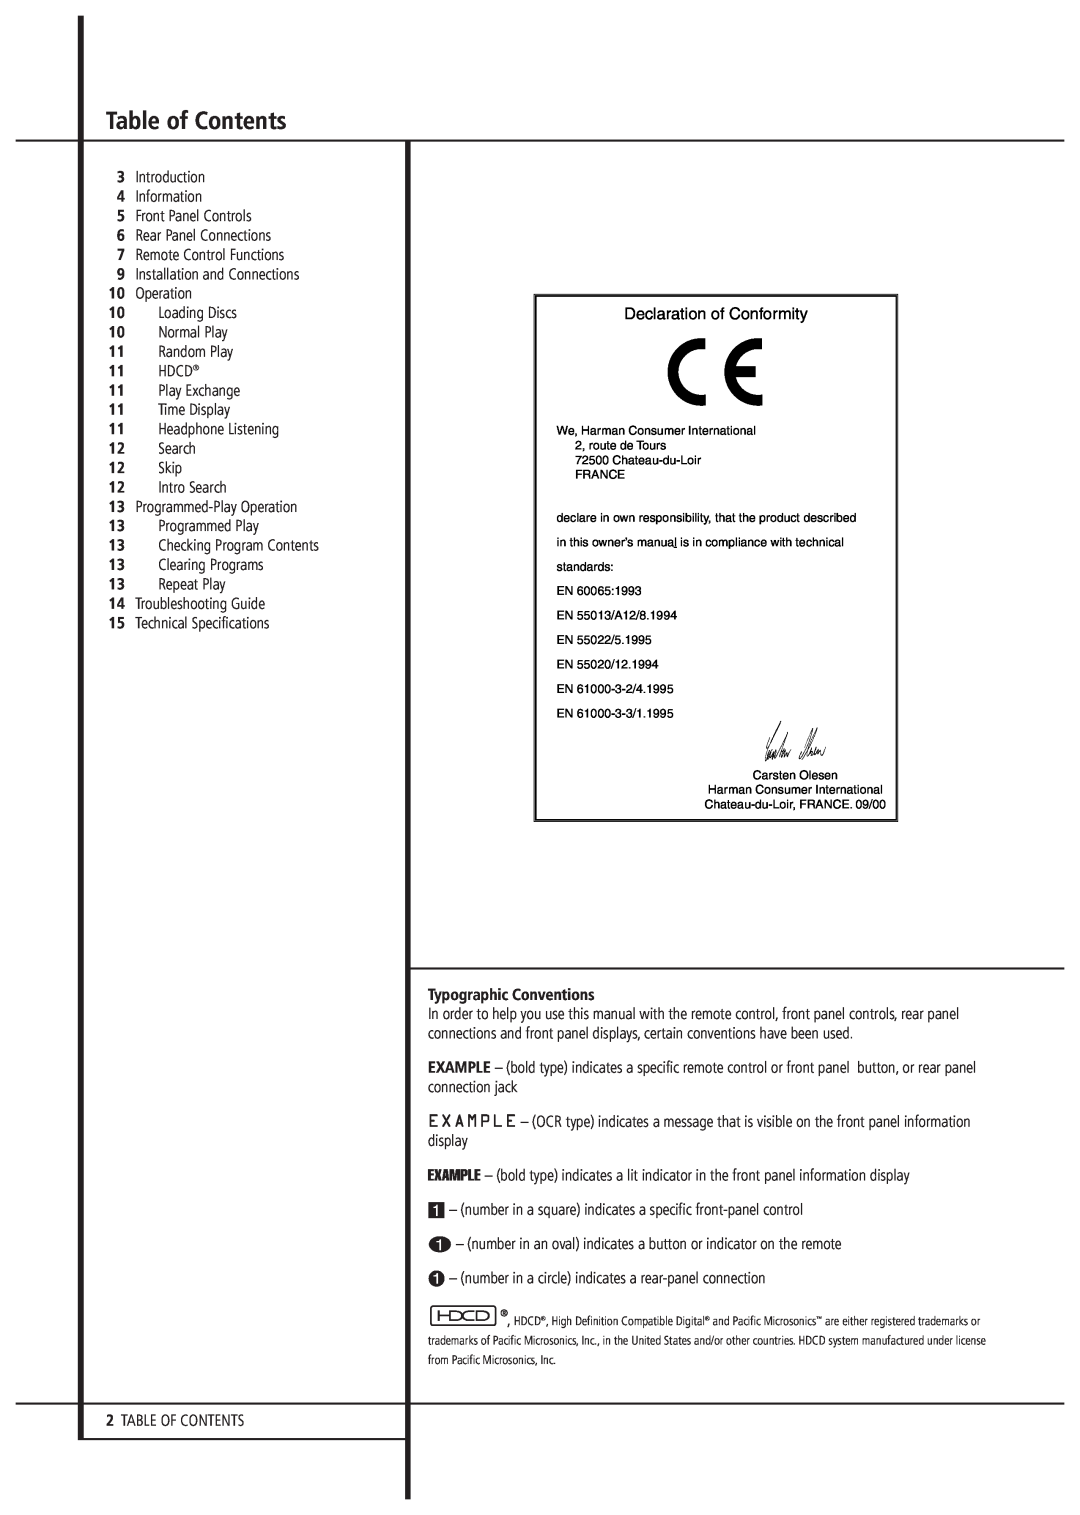 Harman FL 8380 owner manual Table of Contents, Typographic Conventions 